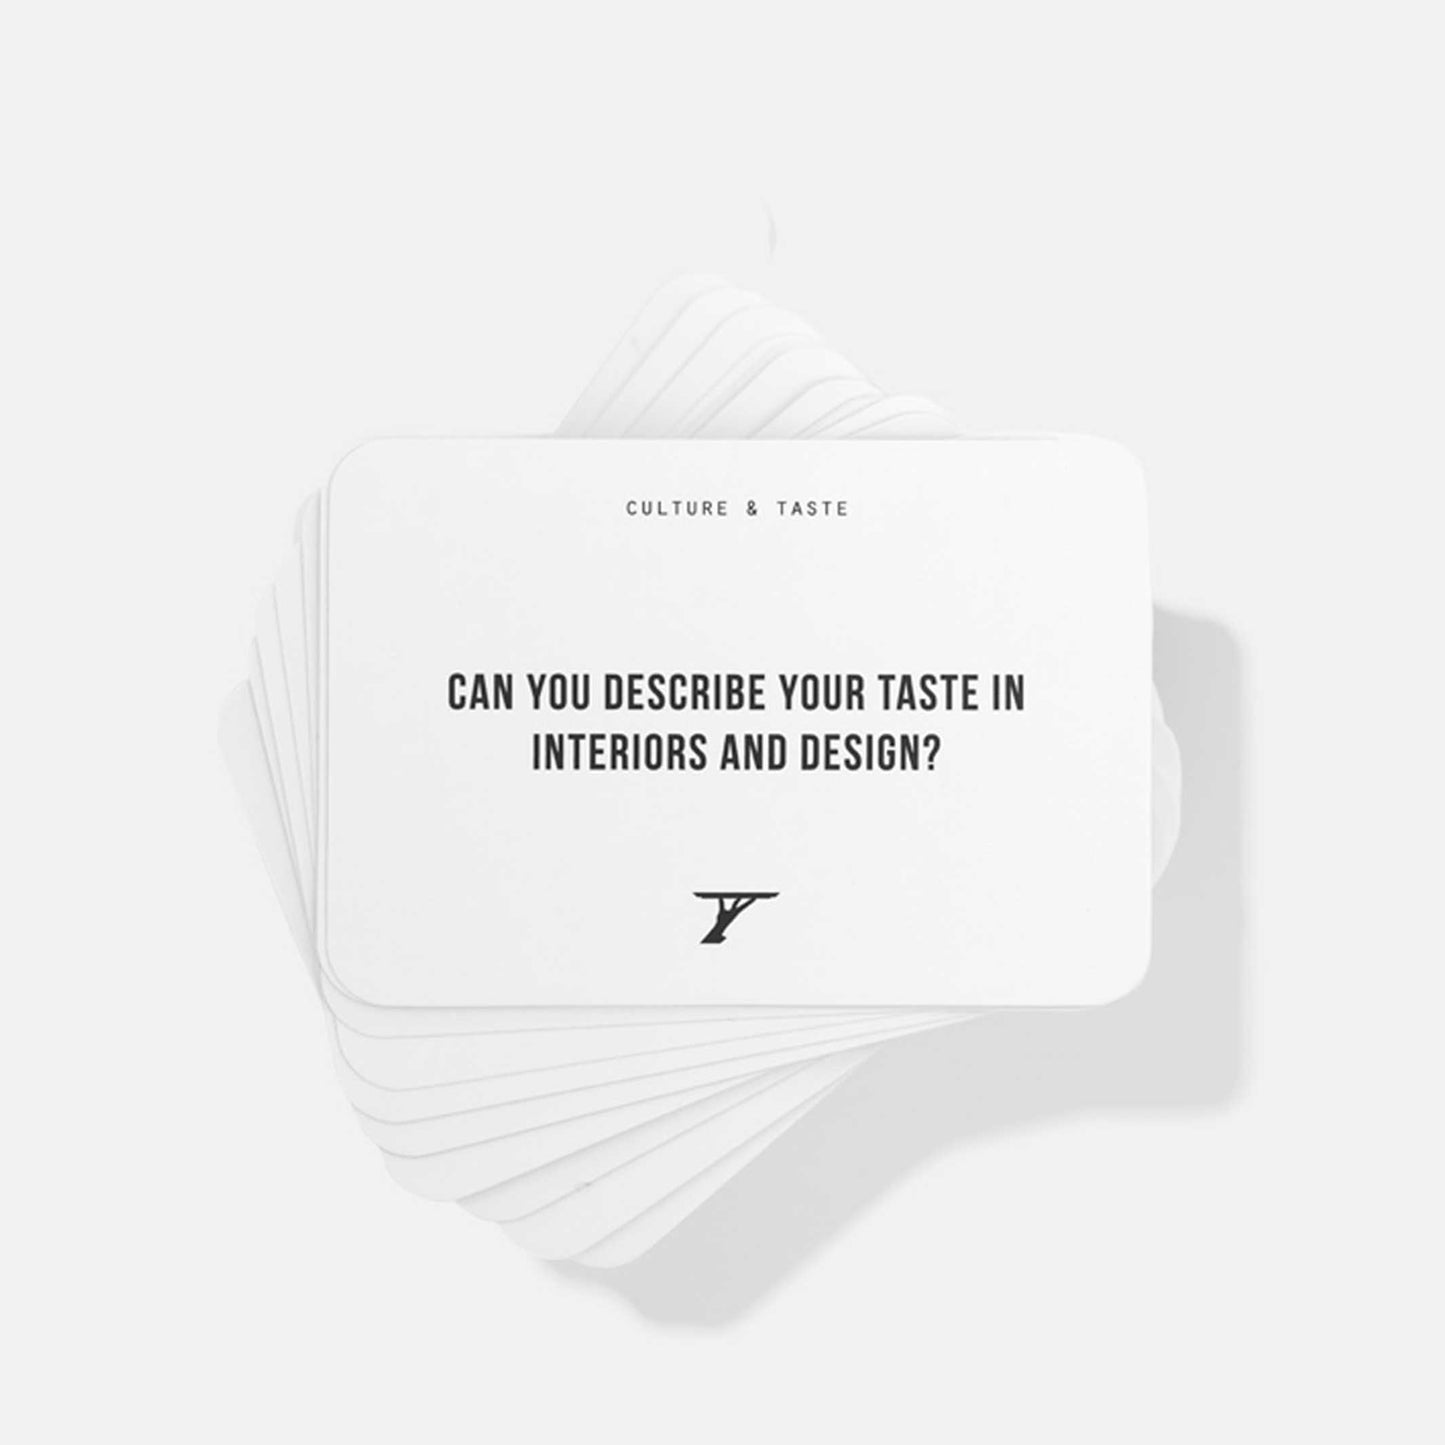 
                  
                    100 Questions Card Game
                  
                